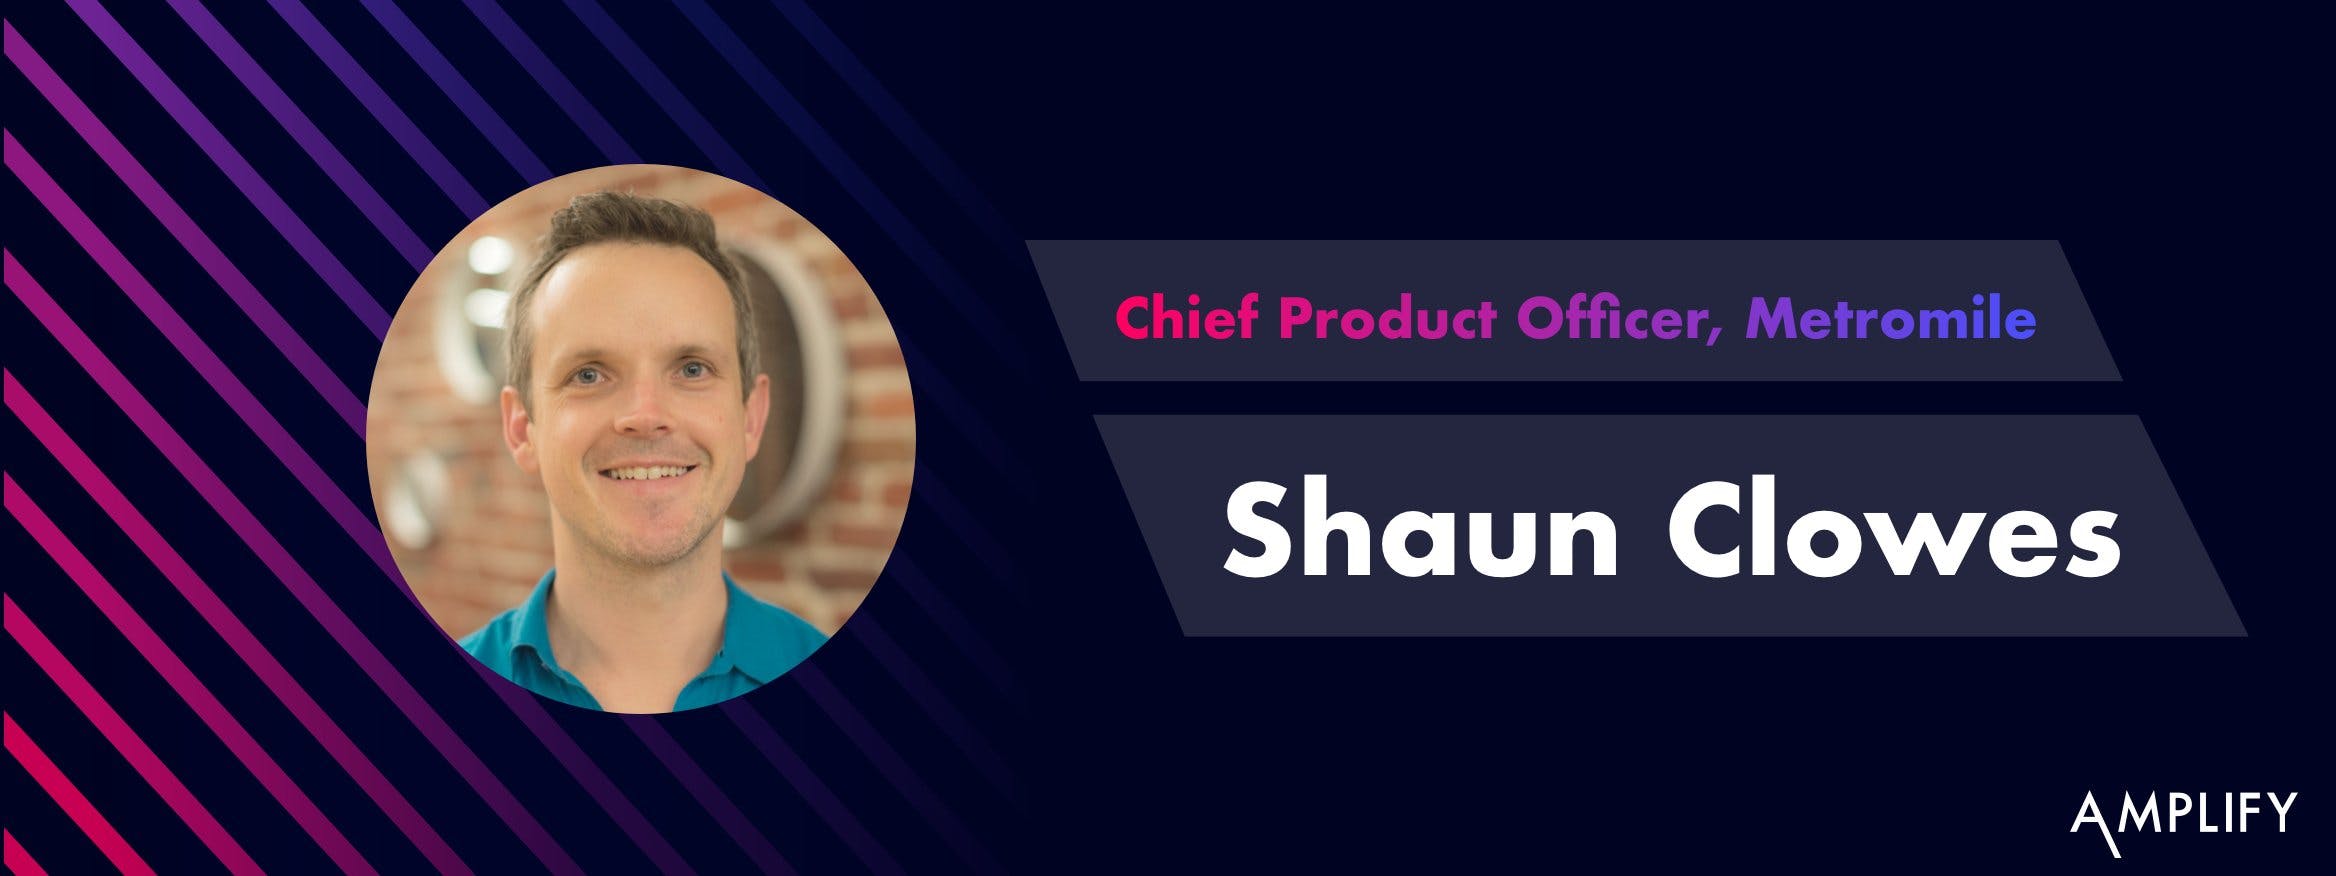 Shaun Clowes of Metromile on Delivering Real Value to Users